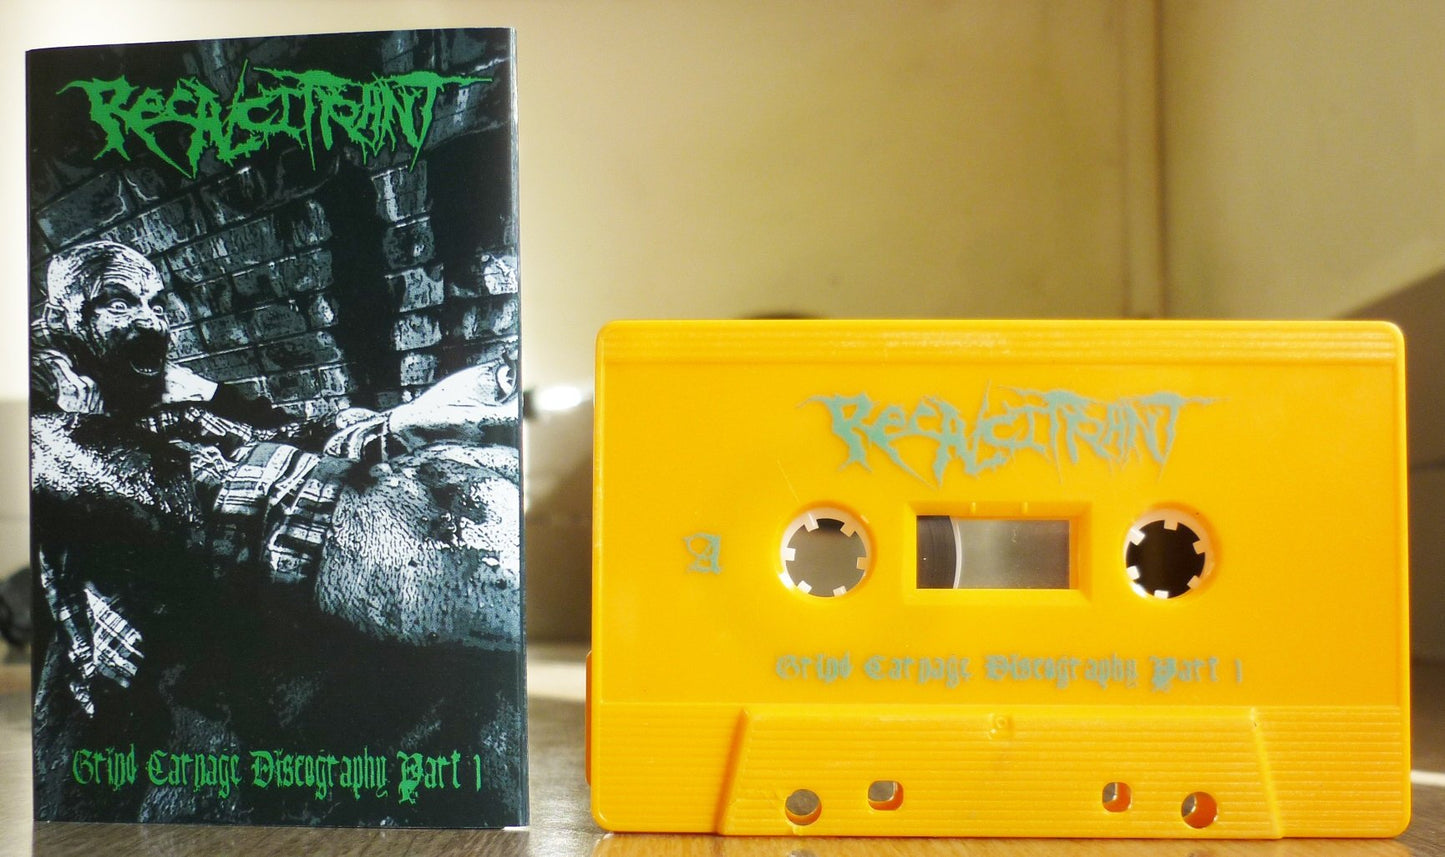 RECALCITRANT - Grind Carnage Discography Part 1 Tape